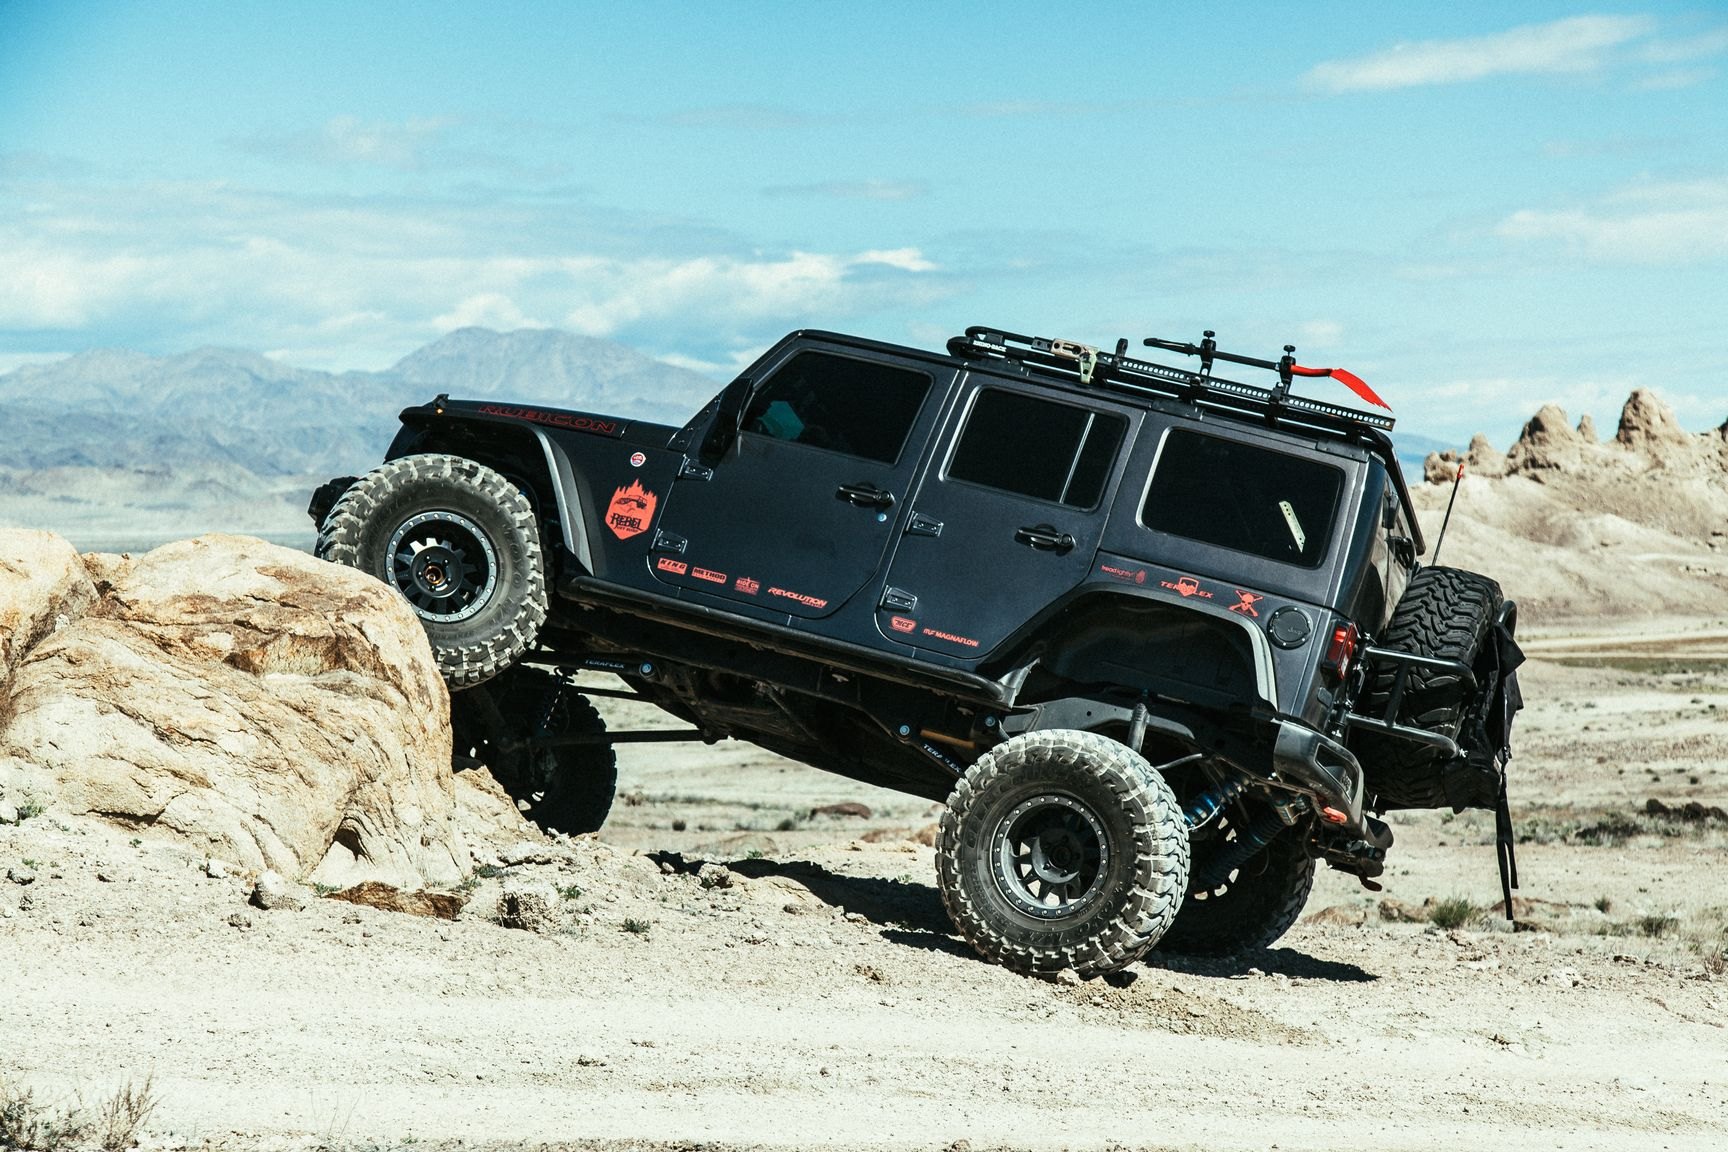 Custom Wheels on Black Lifted Jeep Wrangler Rubicon - Photo by Rebel Off-Road